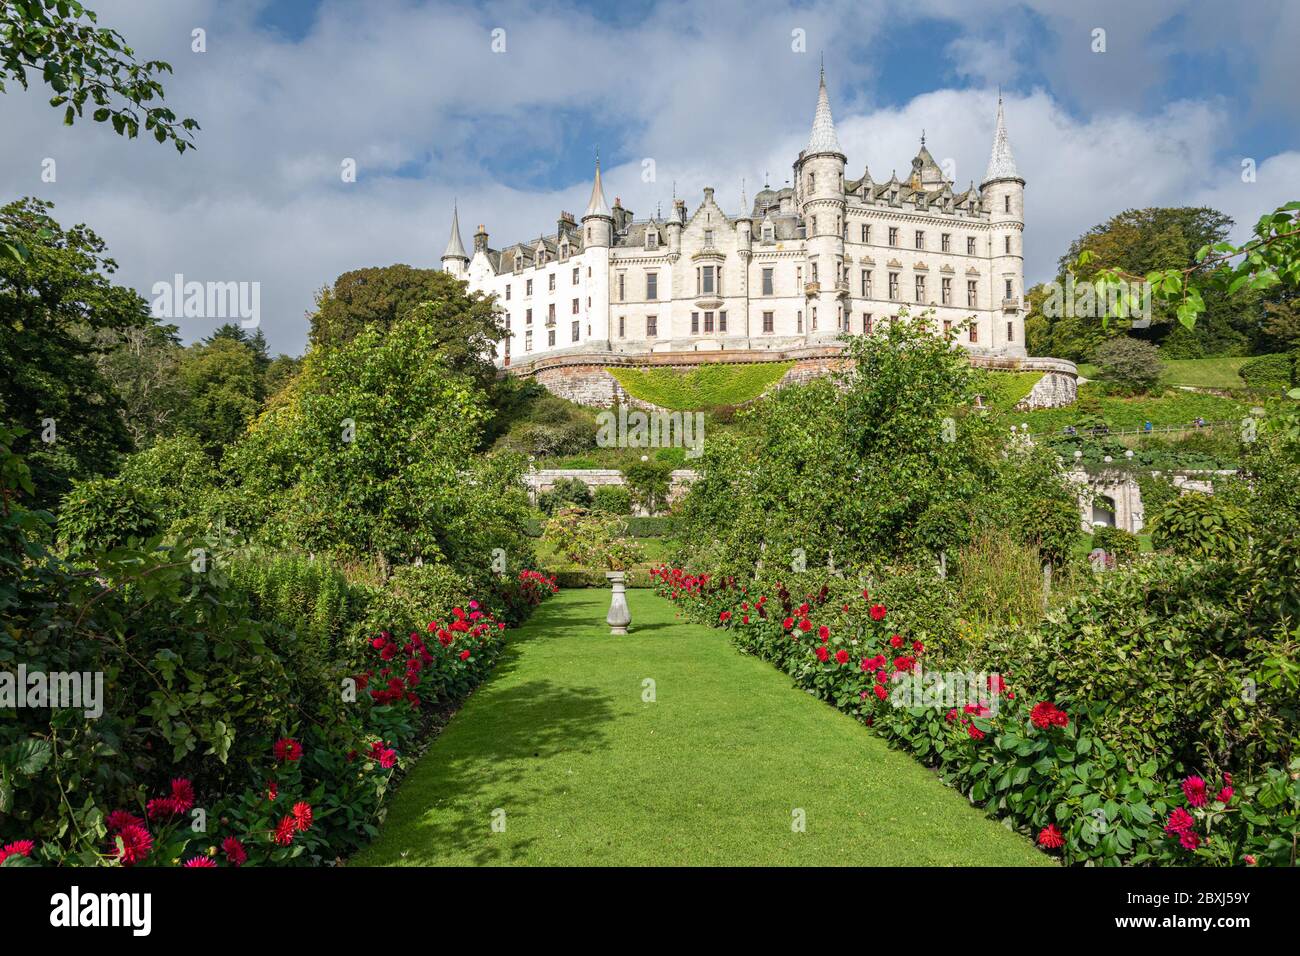 Dunrobin Castle the family seat of the Earl of Sutherland and the Clan Sutherland. View from the castle gardens Stock Photo